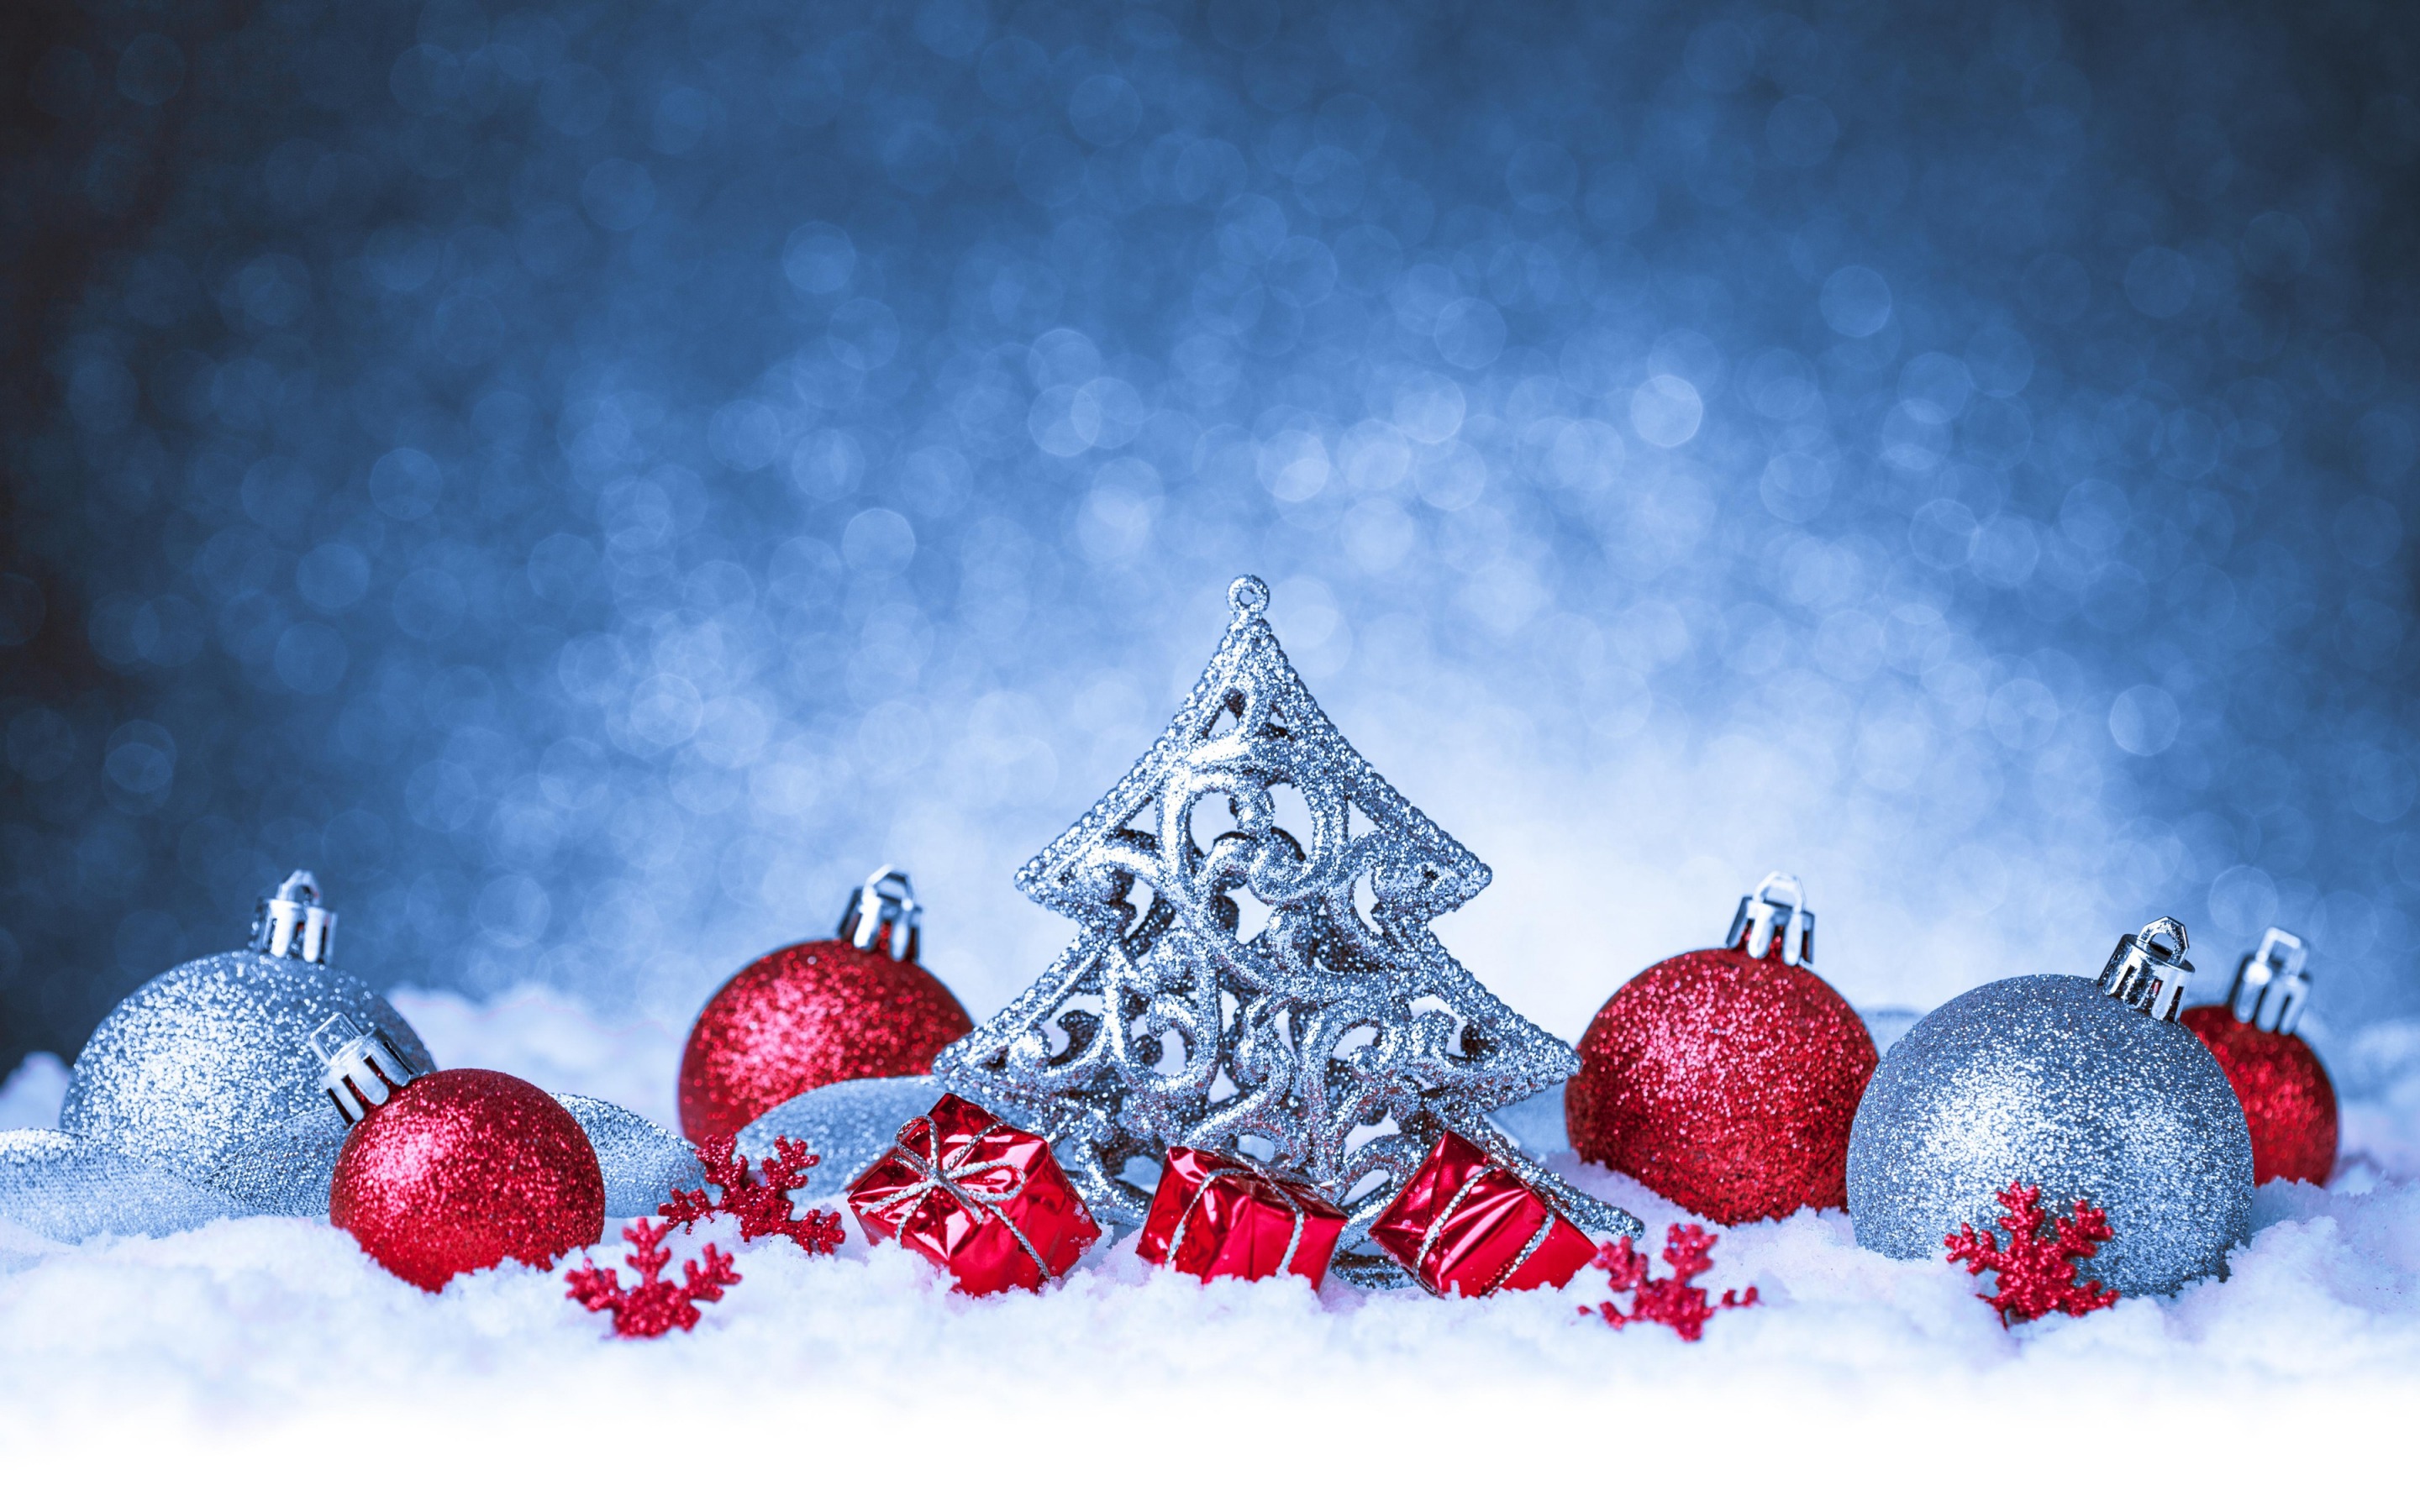 Silver holiday, snow, red, christmas ornaments Free Stock Photos